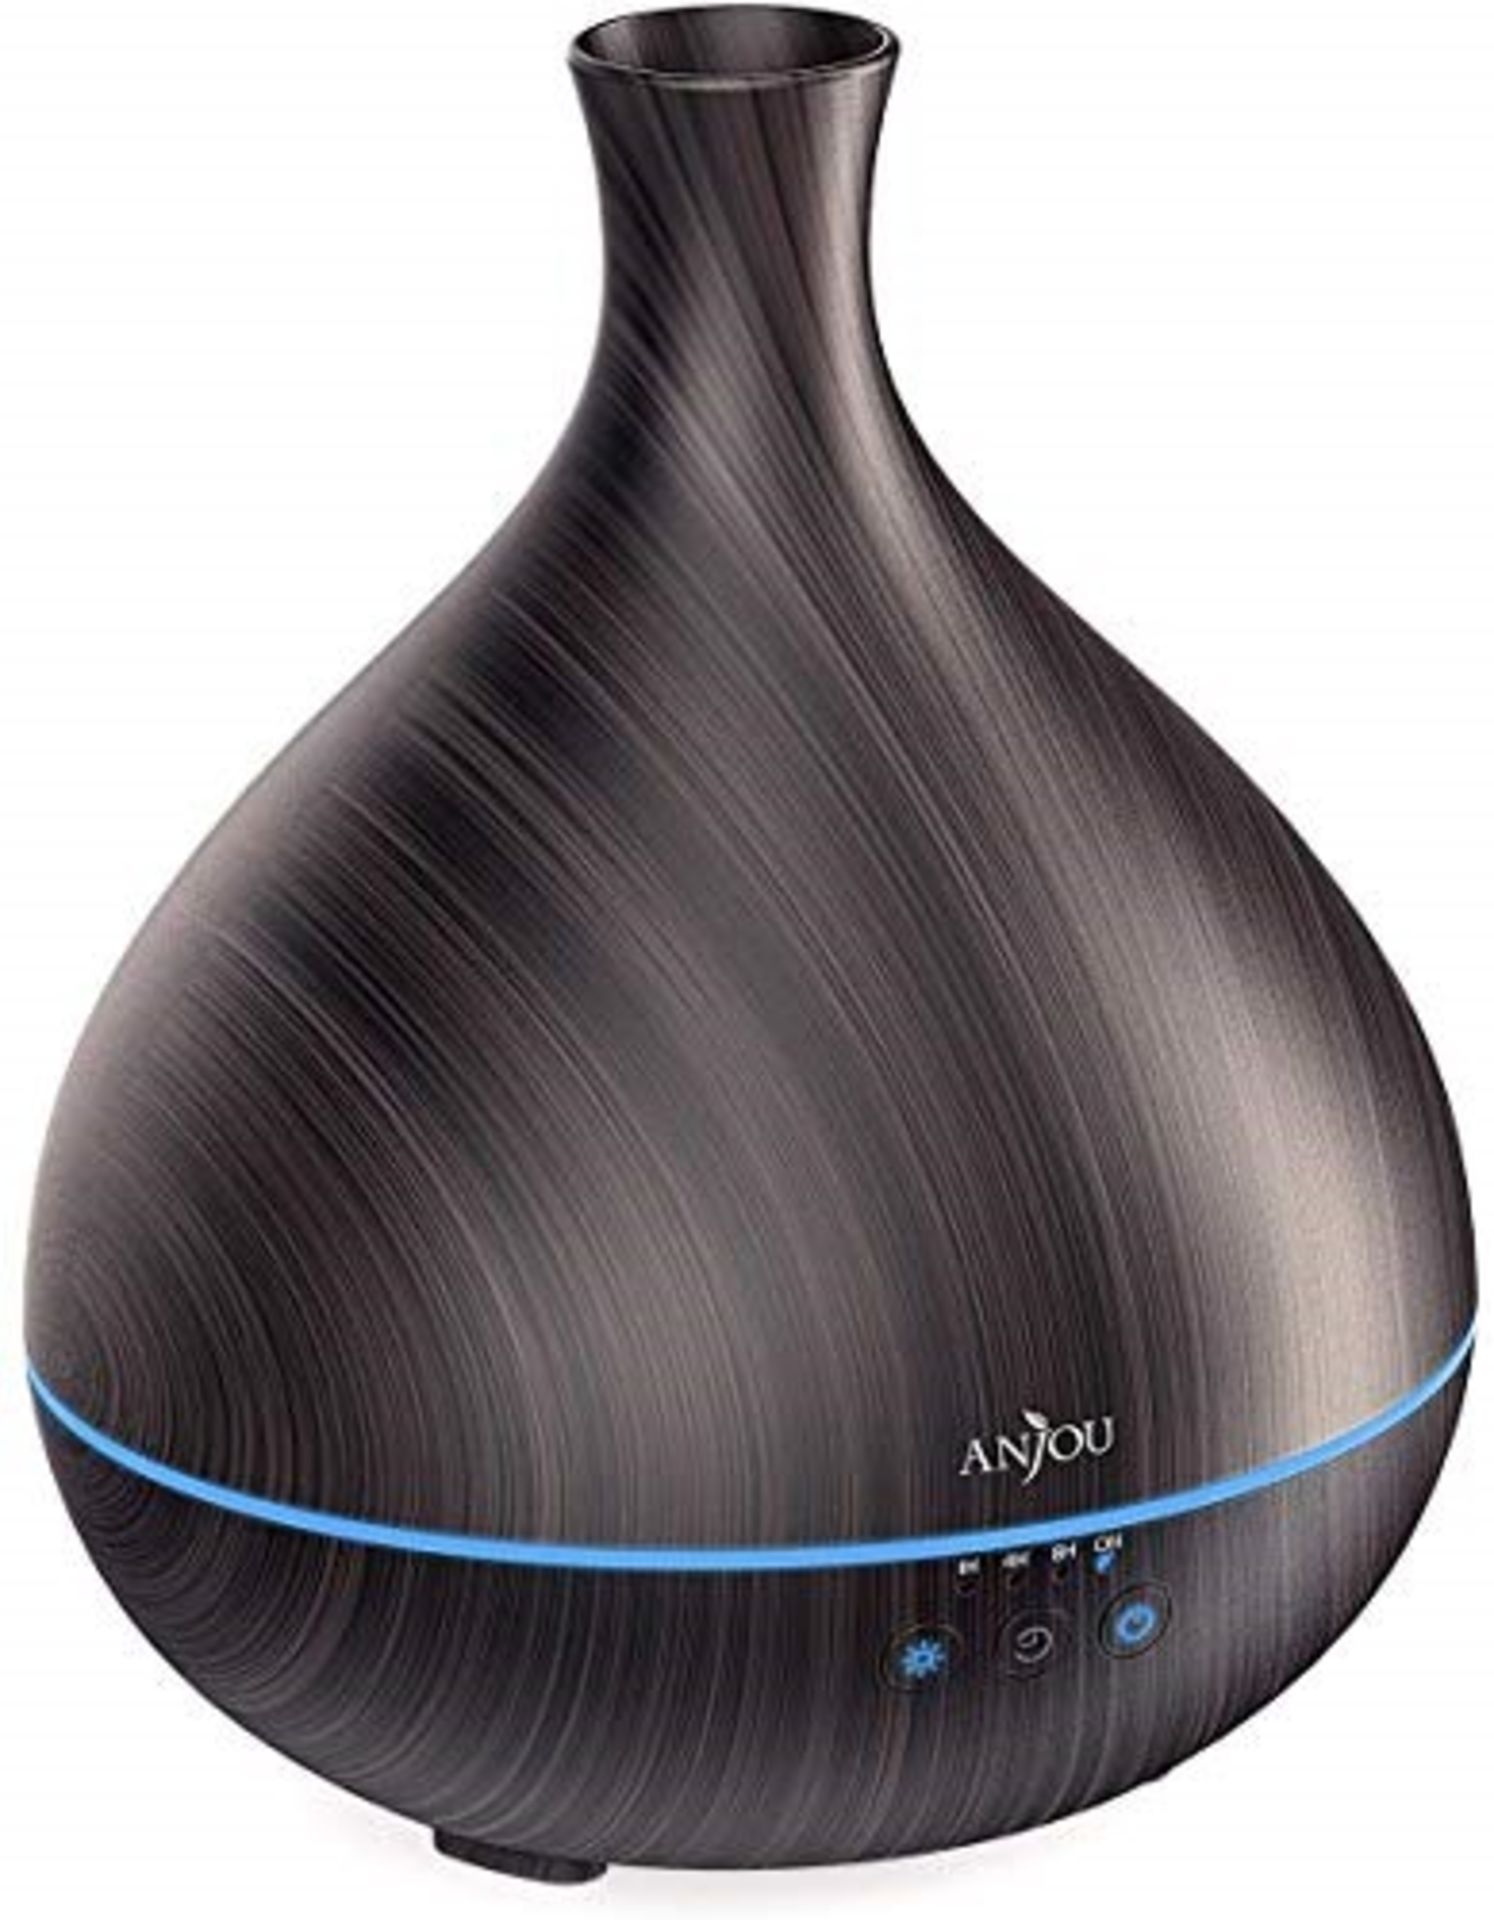 Essential Oil Diffuser, Anjou 500ml Cool Mist Humidifier, One Fill for 12hrs Consisten